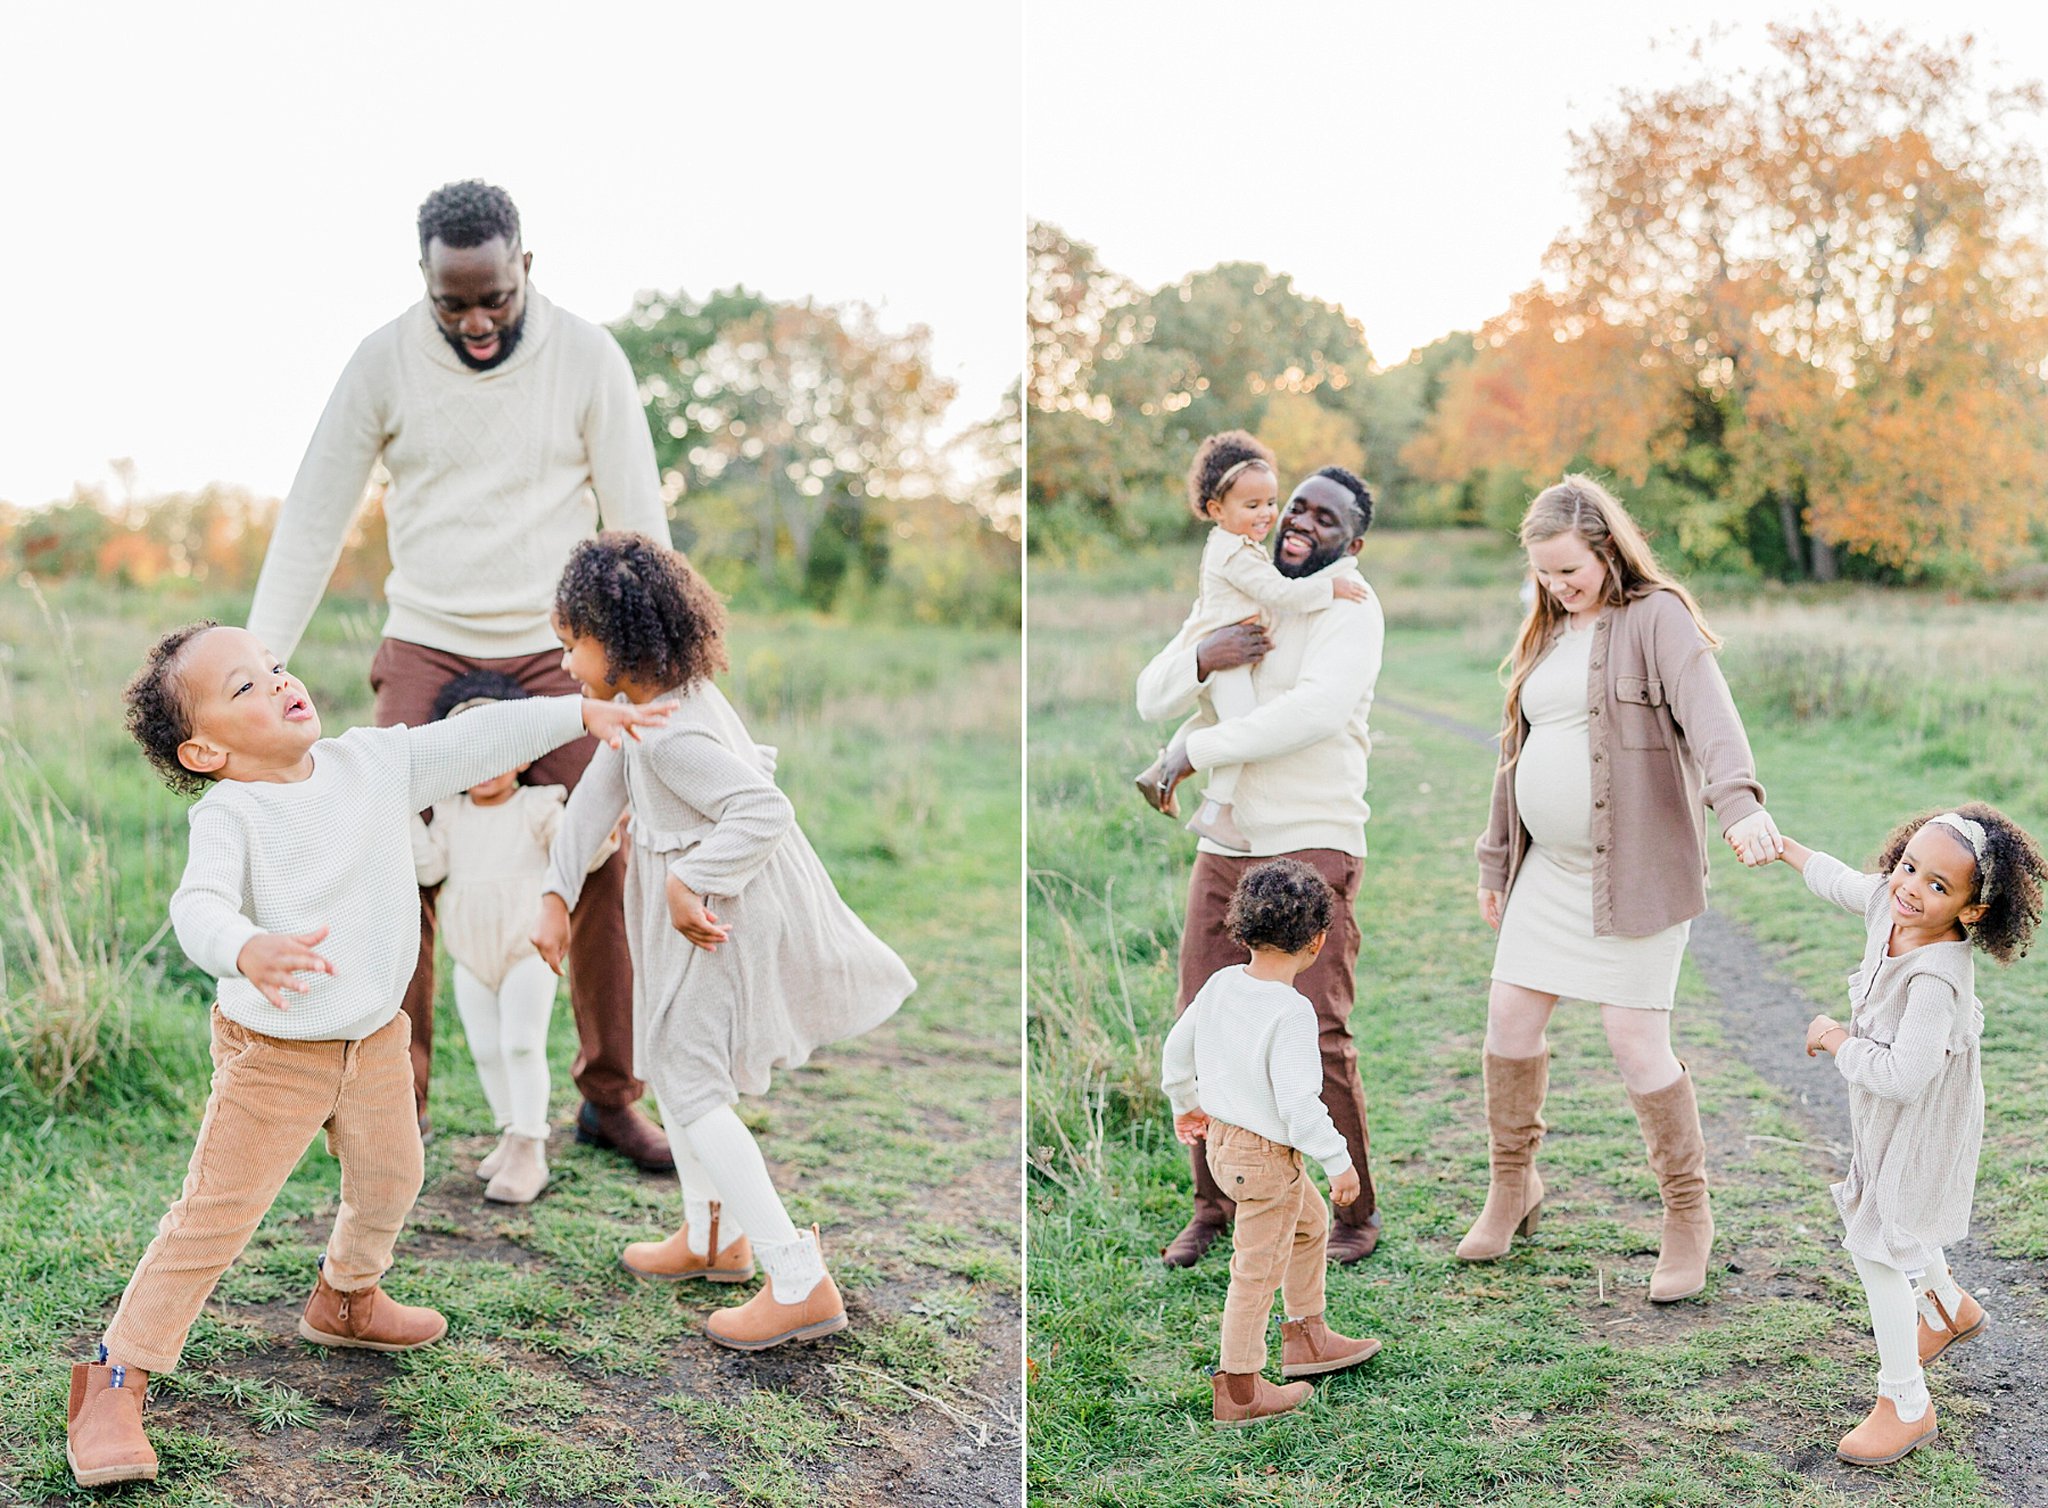 A pregnant mother and her husband play with their three kids in a park path in all matching beige and brown clothes Prenatal Chiropractor Boston